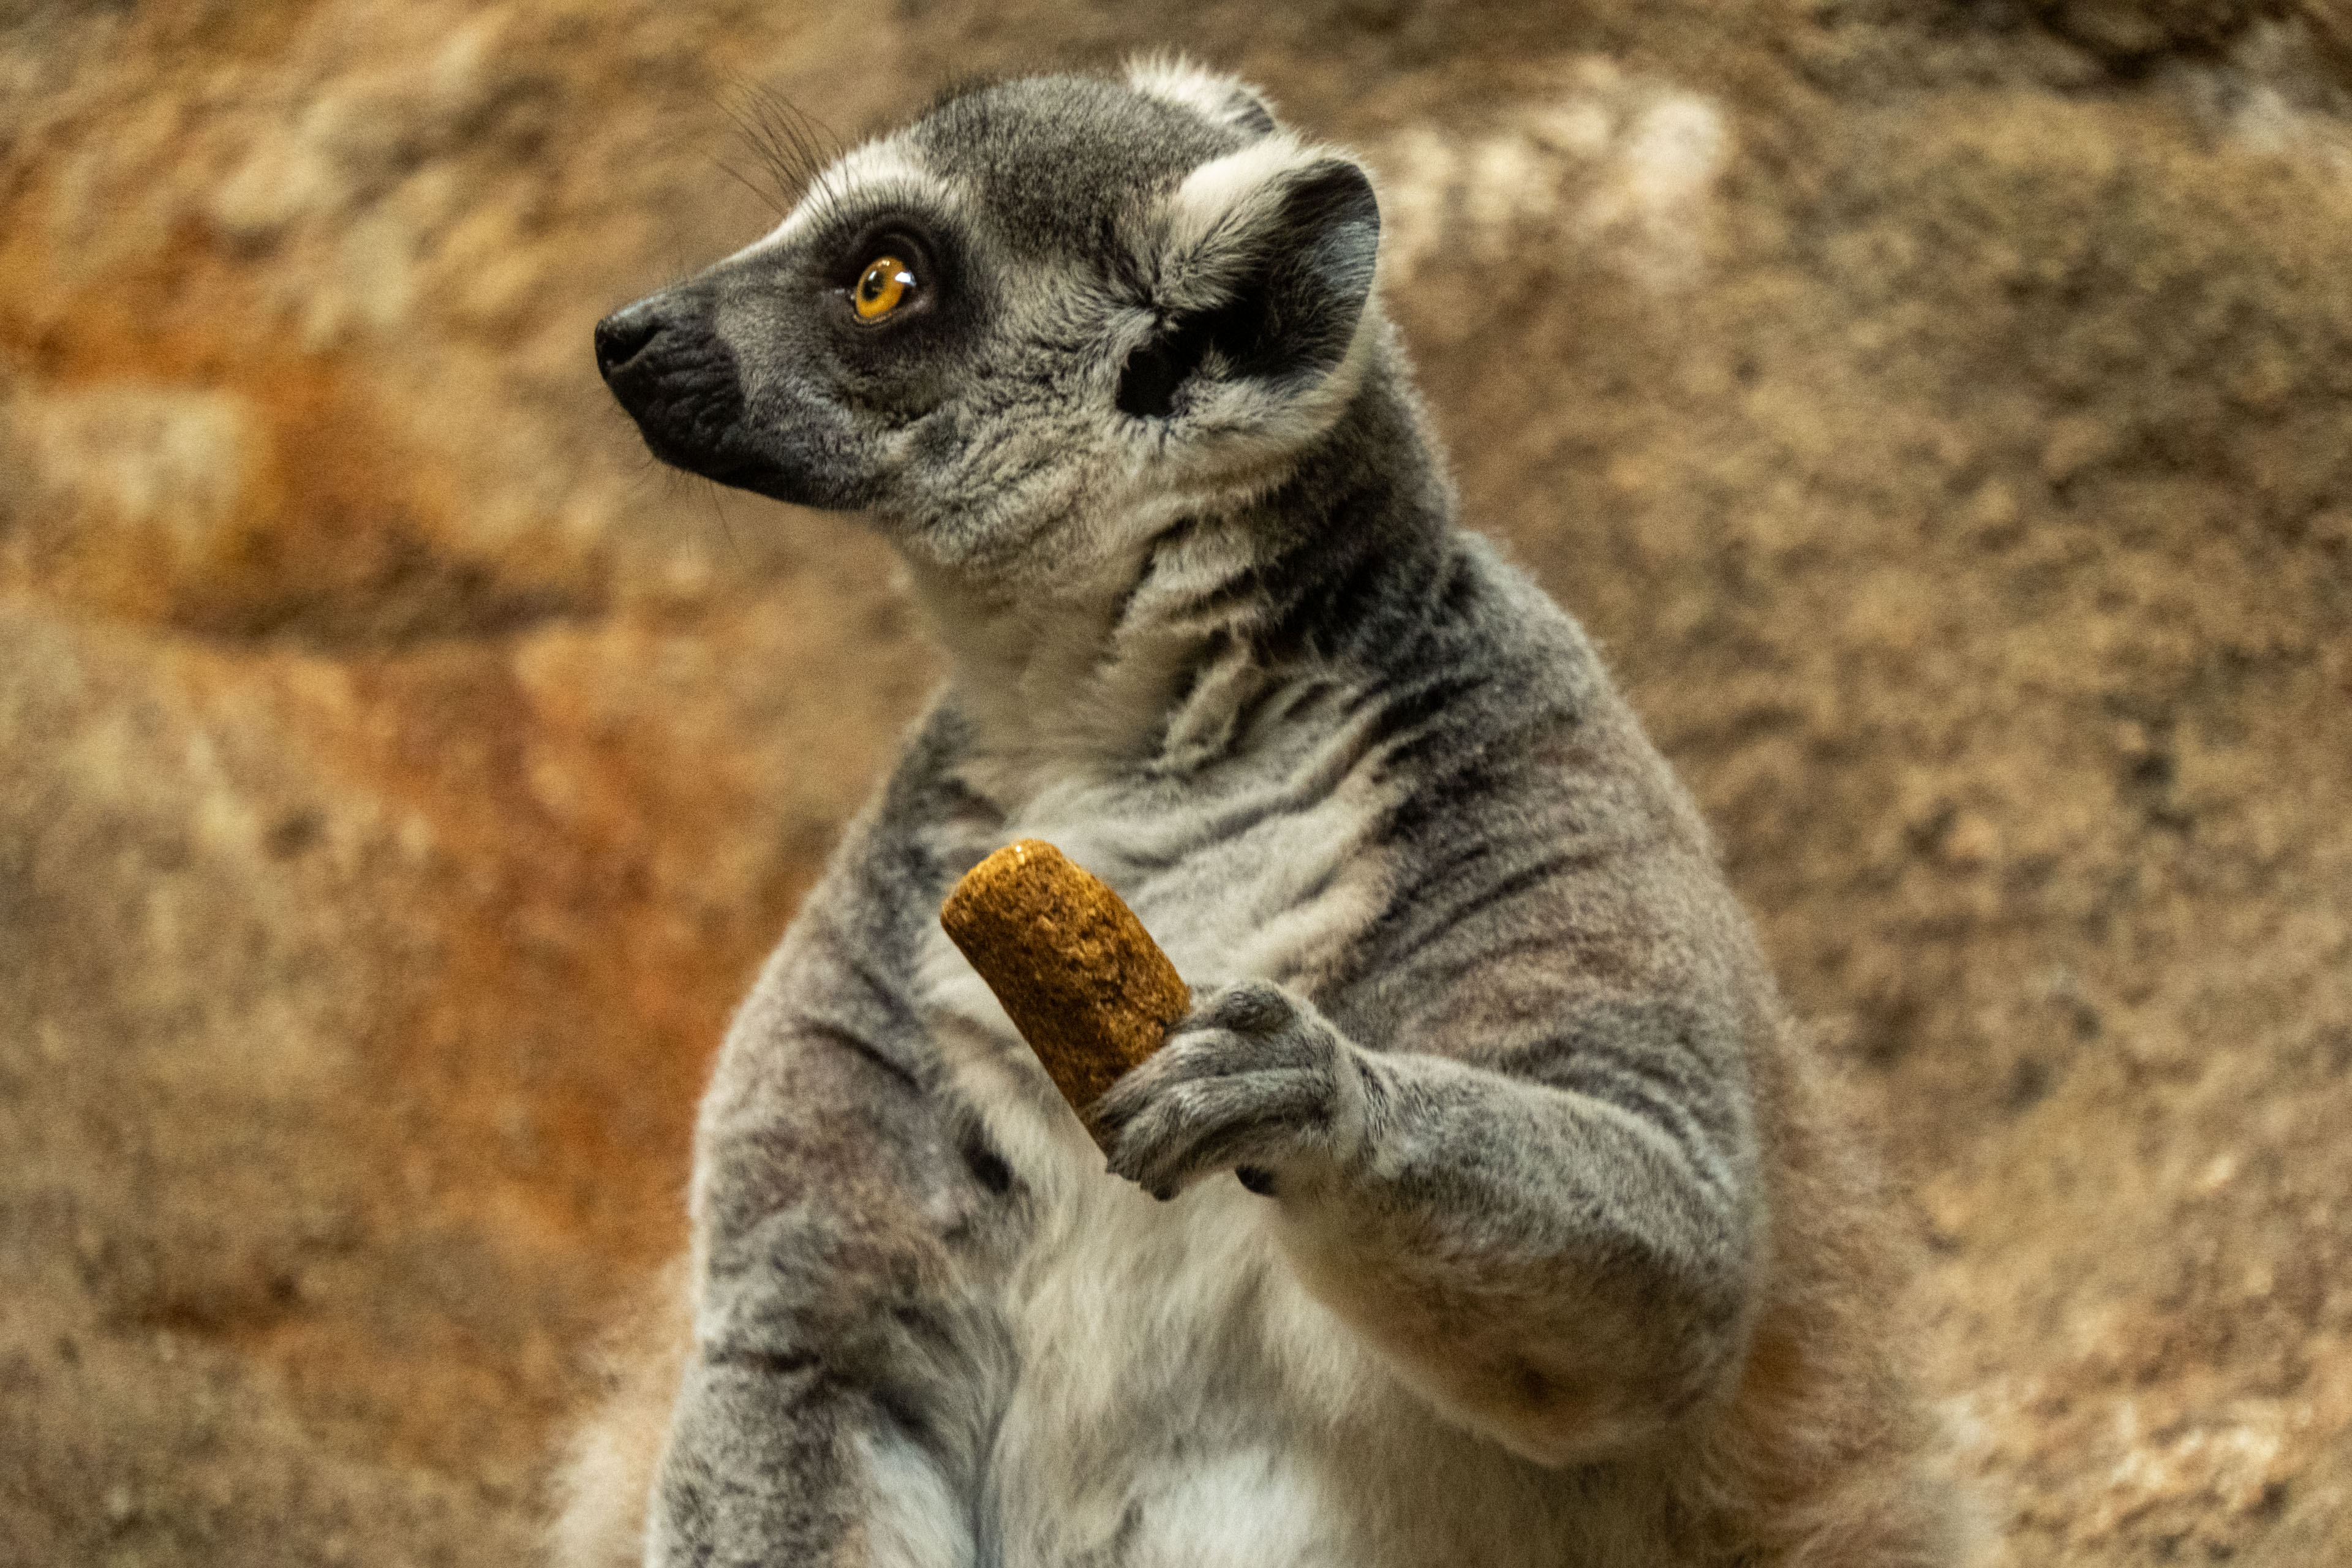 a lemur holding some food in its claw